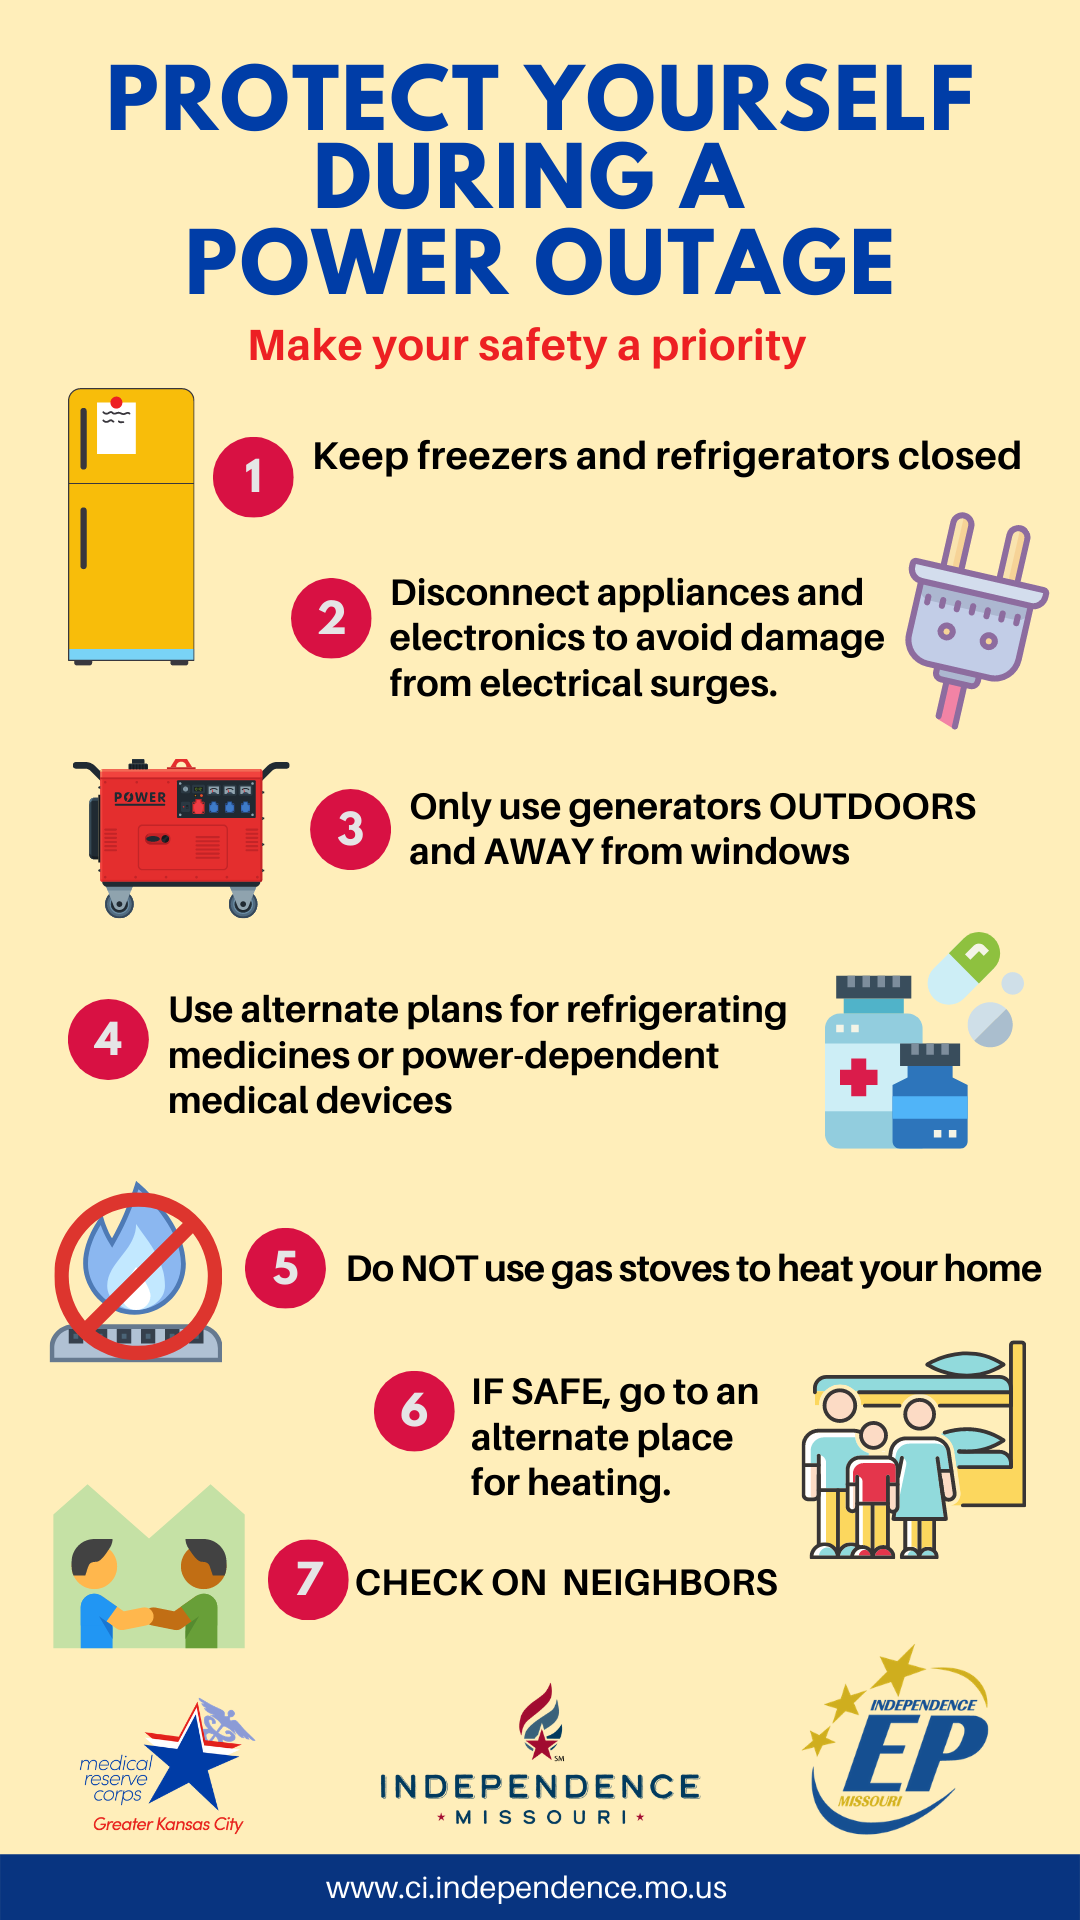 Home Safety During Power Outages: Preparedness And Alternative Lighting 